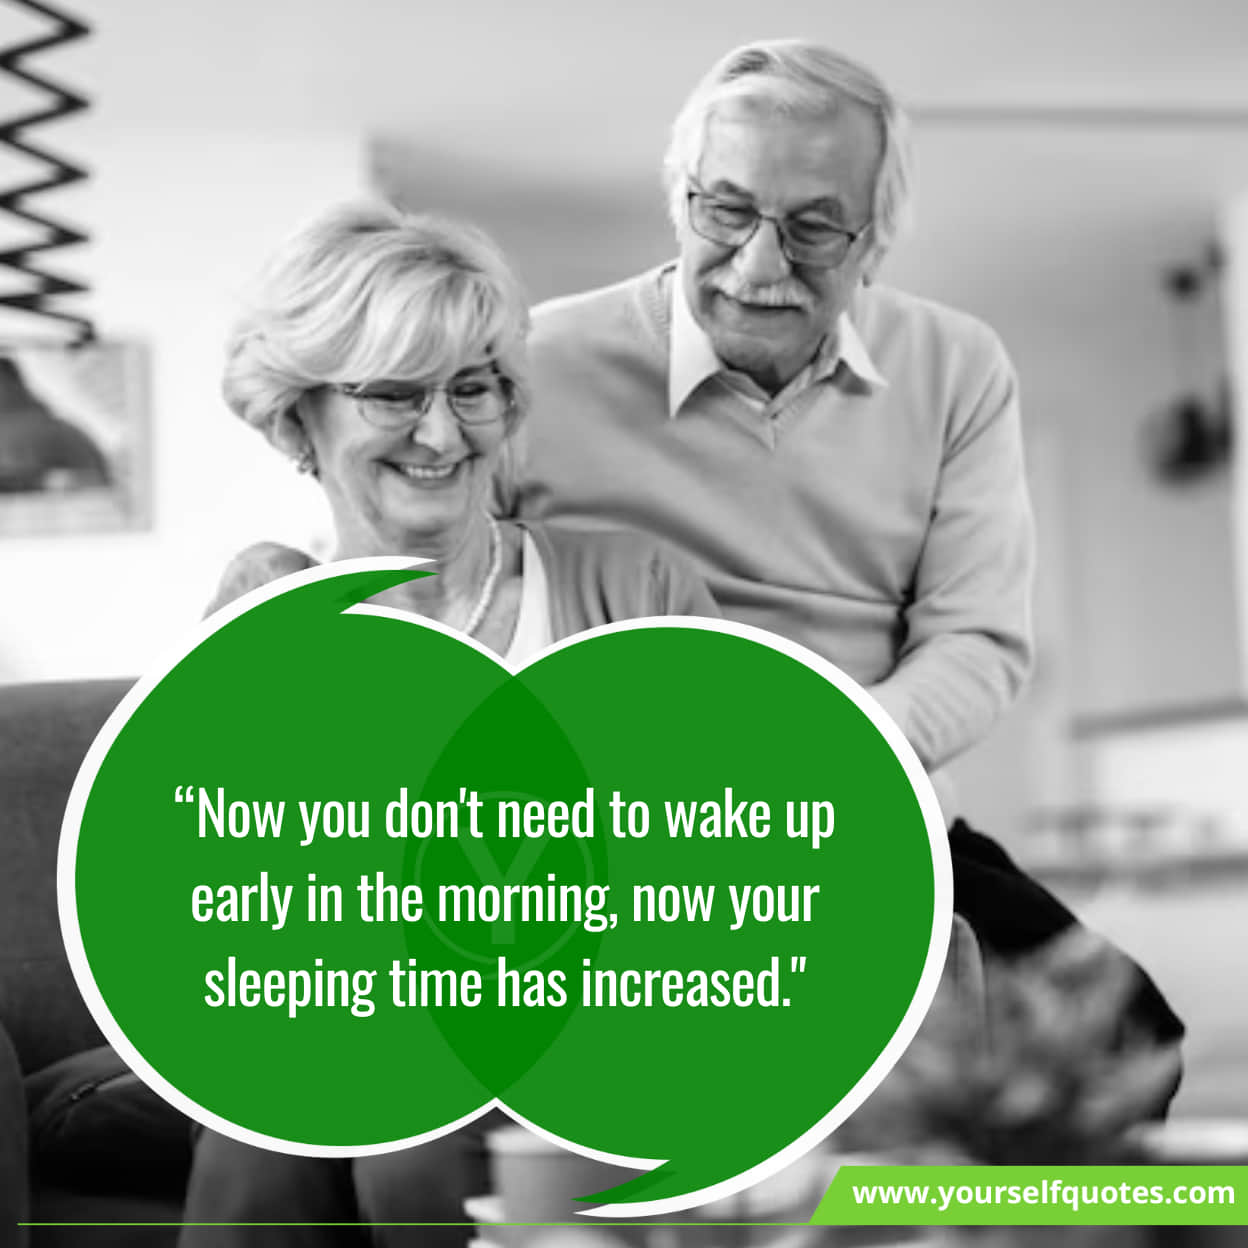 Funny retirement messages to lighten the mood